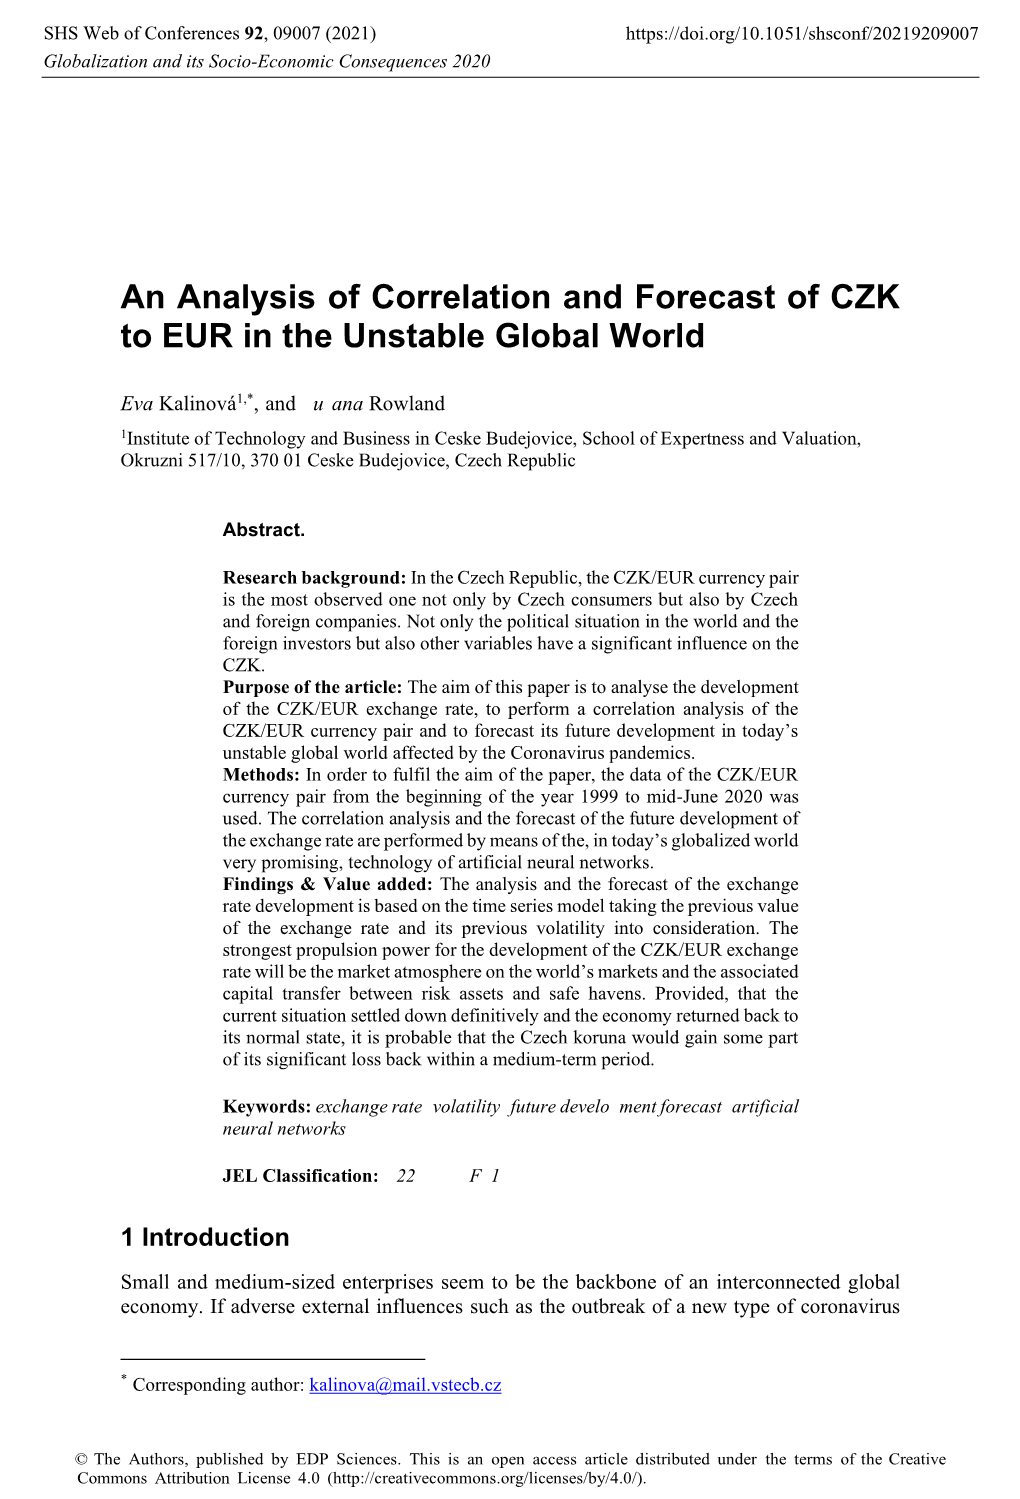 An Analysis of Correlation and Forecast of CZK to EUR in the Unstable Global World